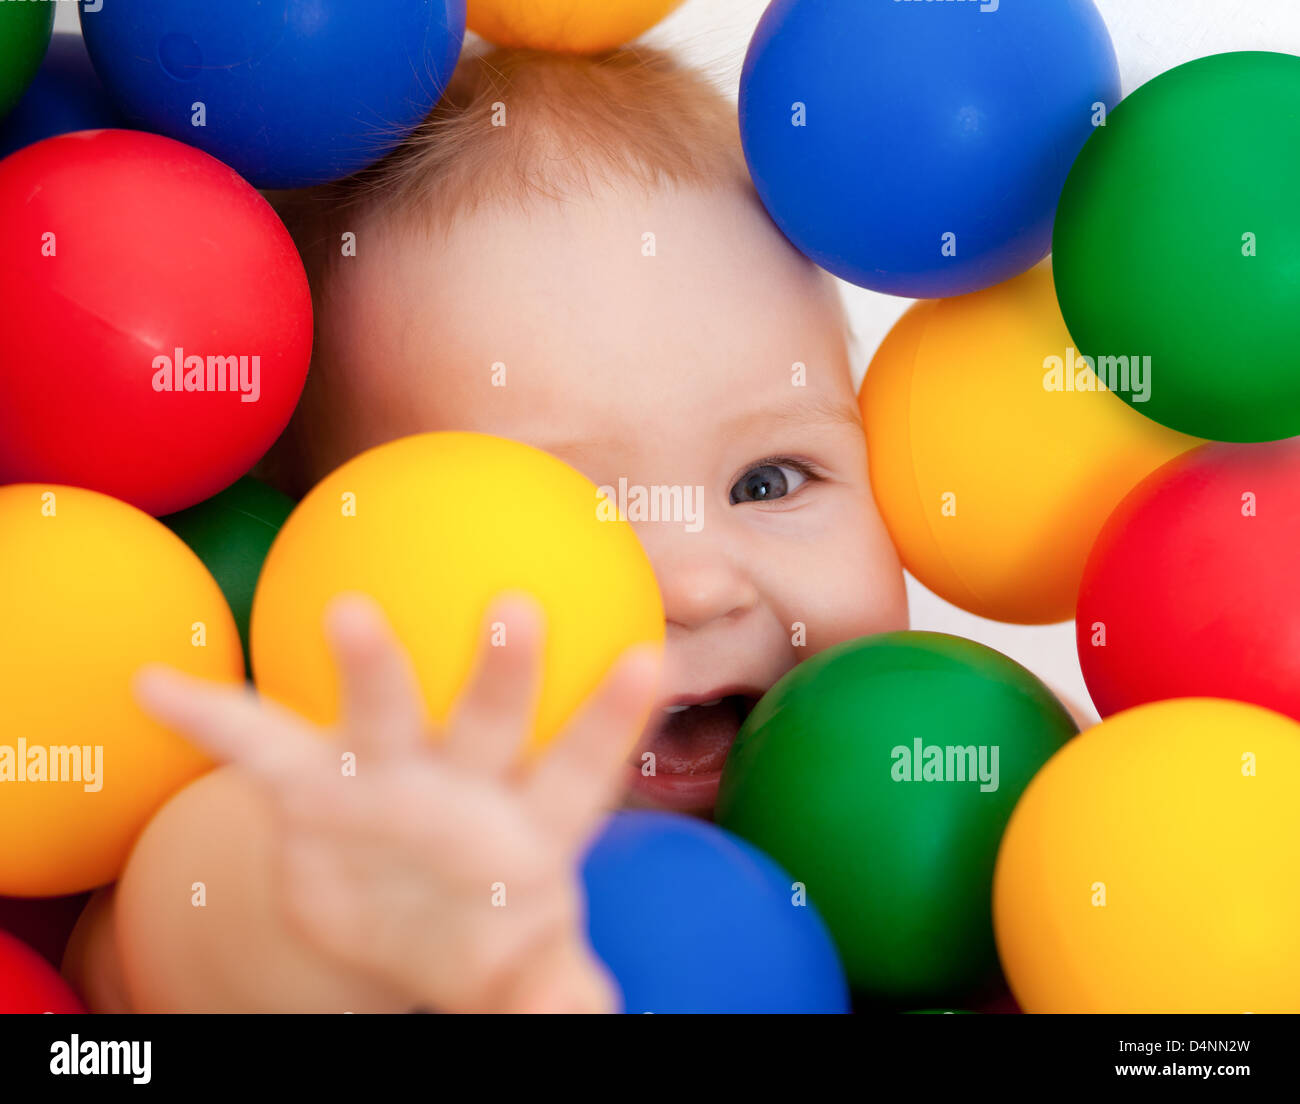 Portrait of a smiling infant lying among colorful balls Stock Photo